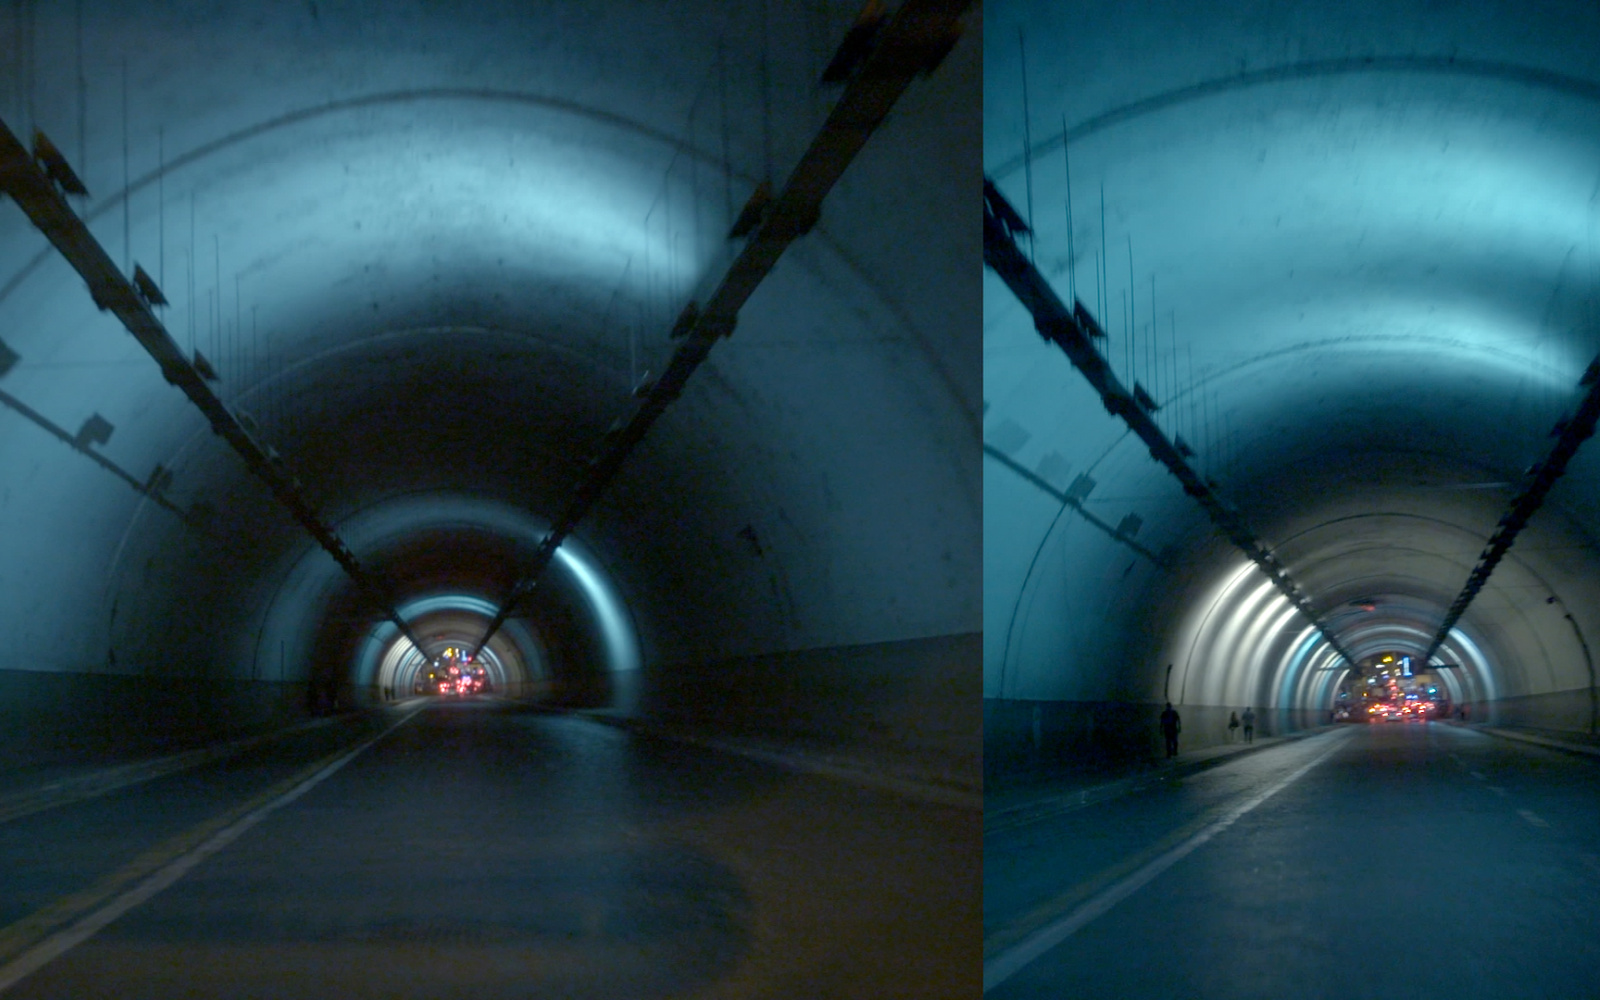 You can see two tunnels. At the end of the tunnel there are red lights. The image is blue, black.